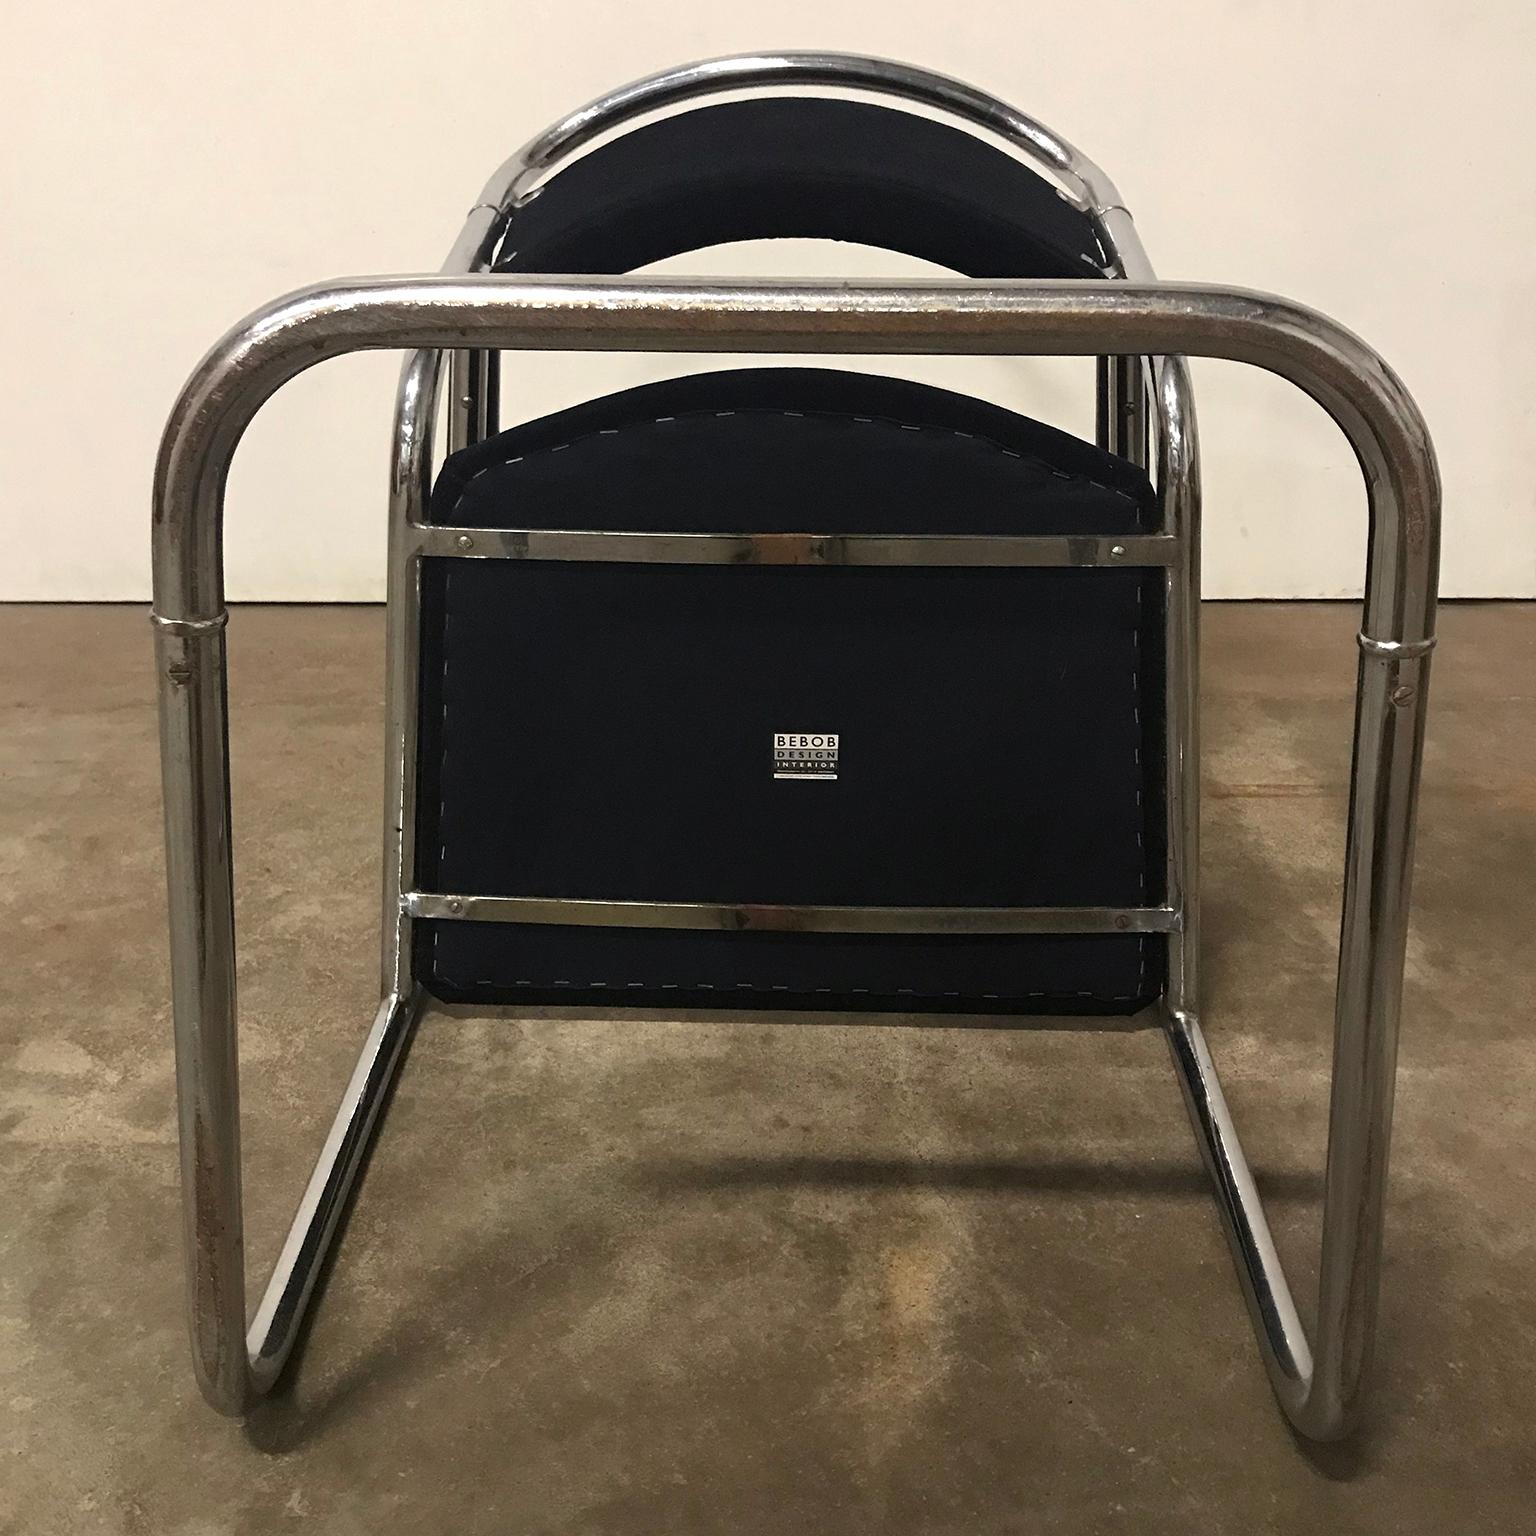 Dutch Design, Set of Original Tubular Chairs with Black Upholstery, circa 1930 For Sale 9